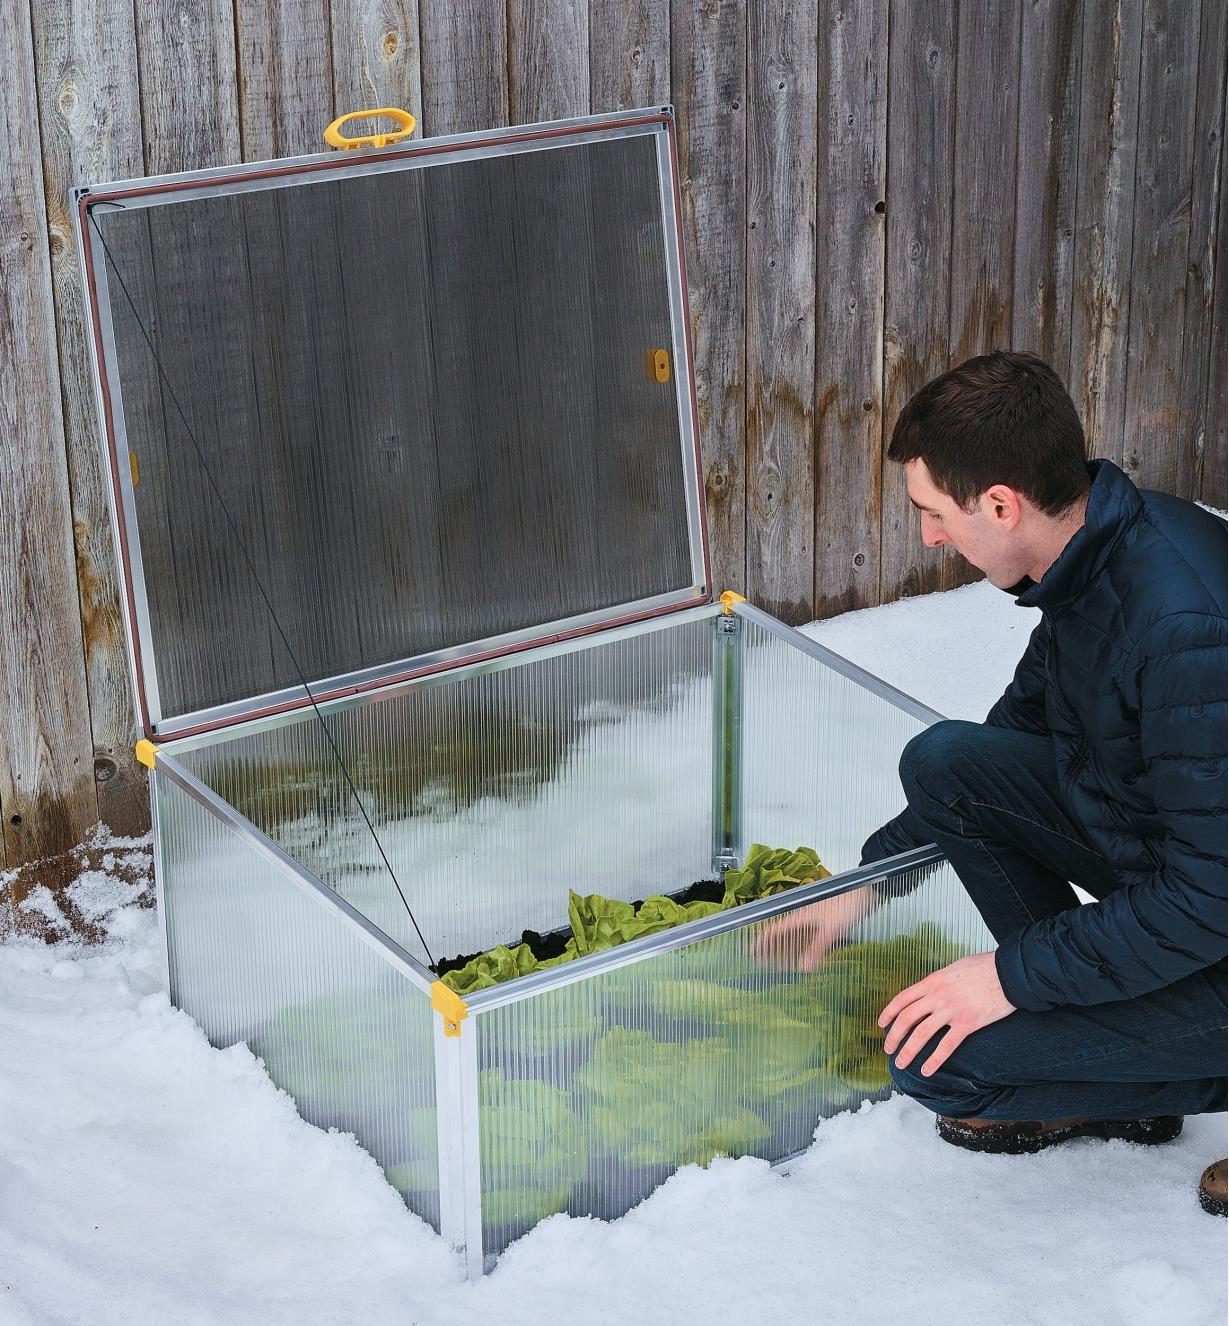 A man tends his plants in the Double-Walled Cold Frame